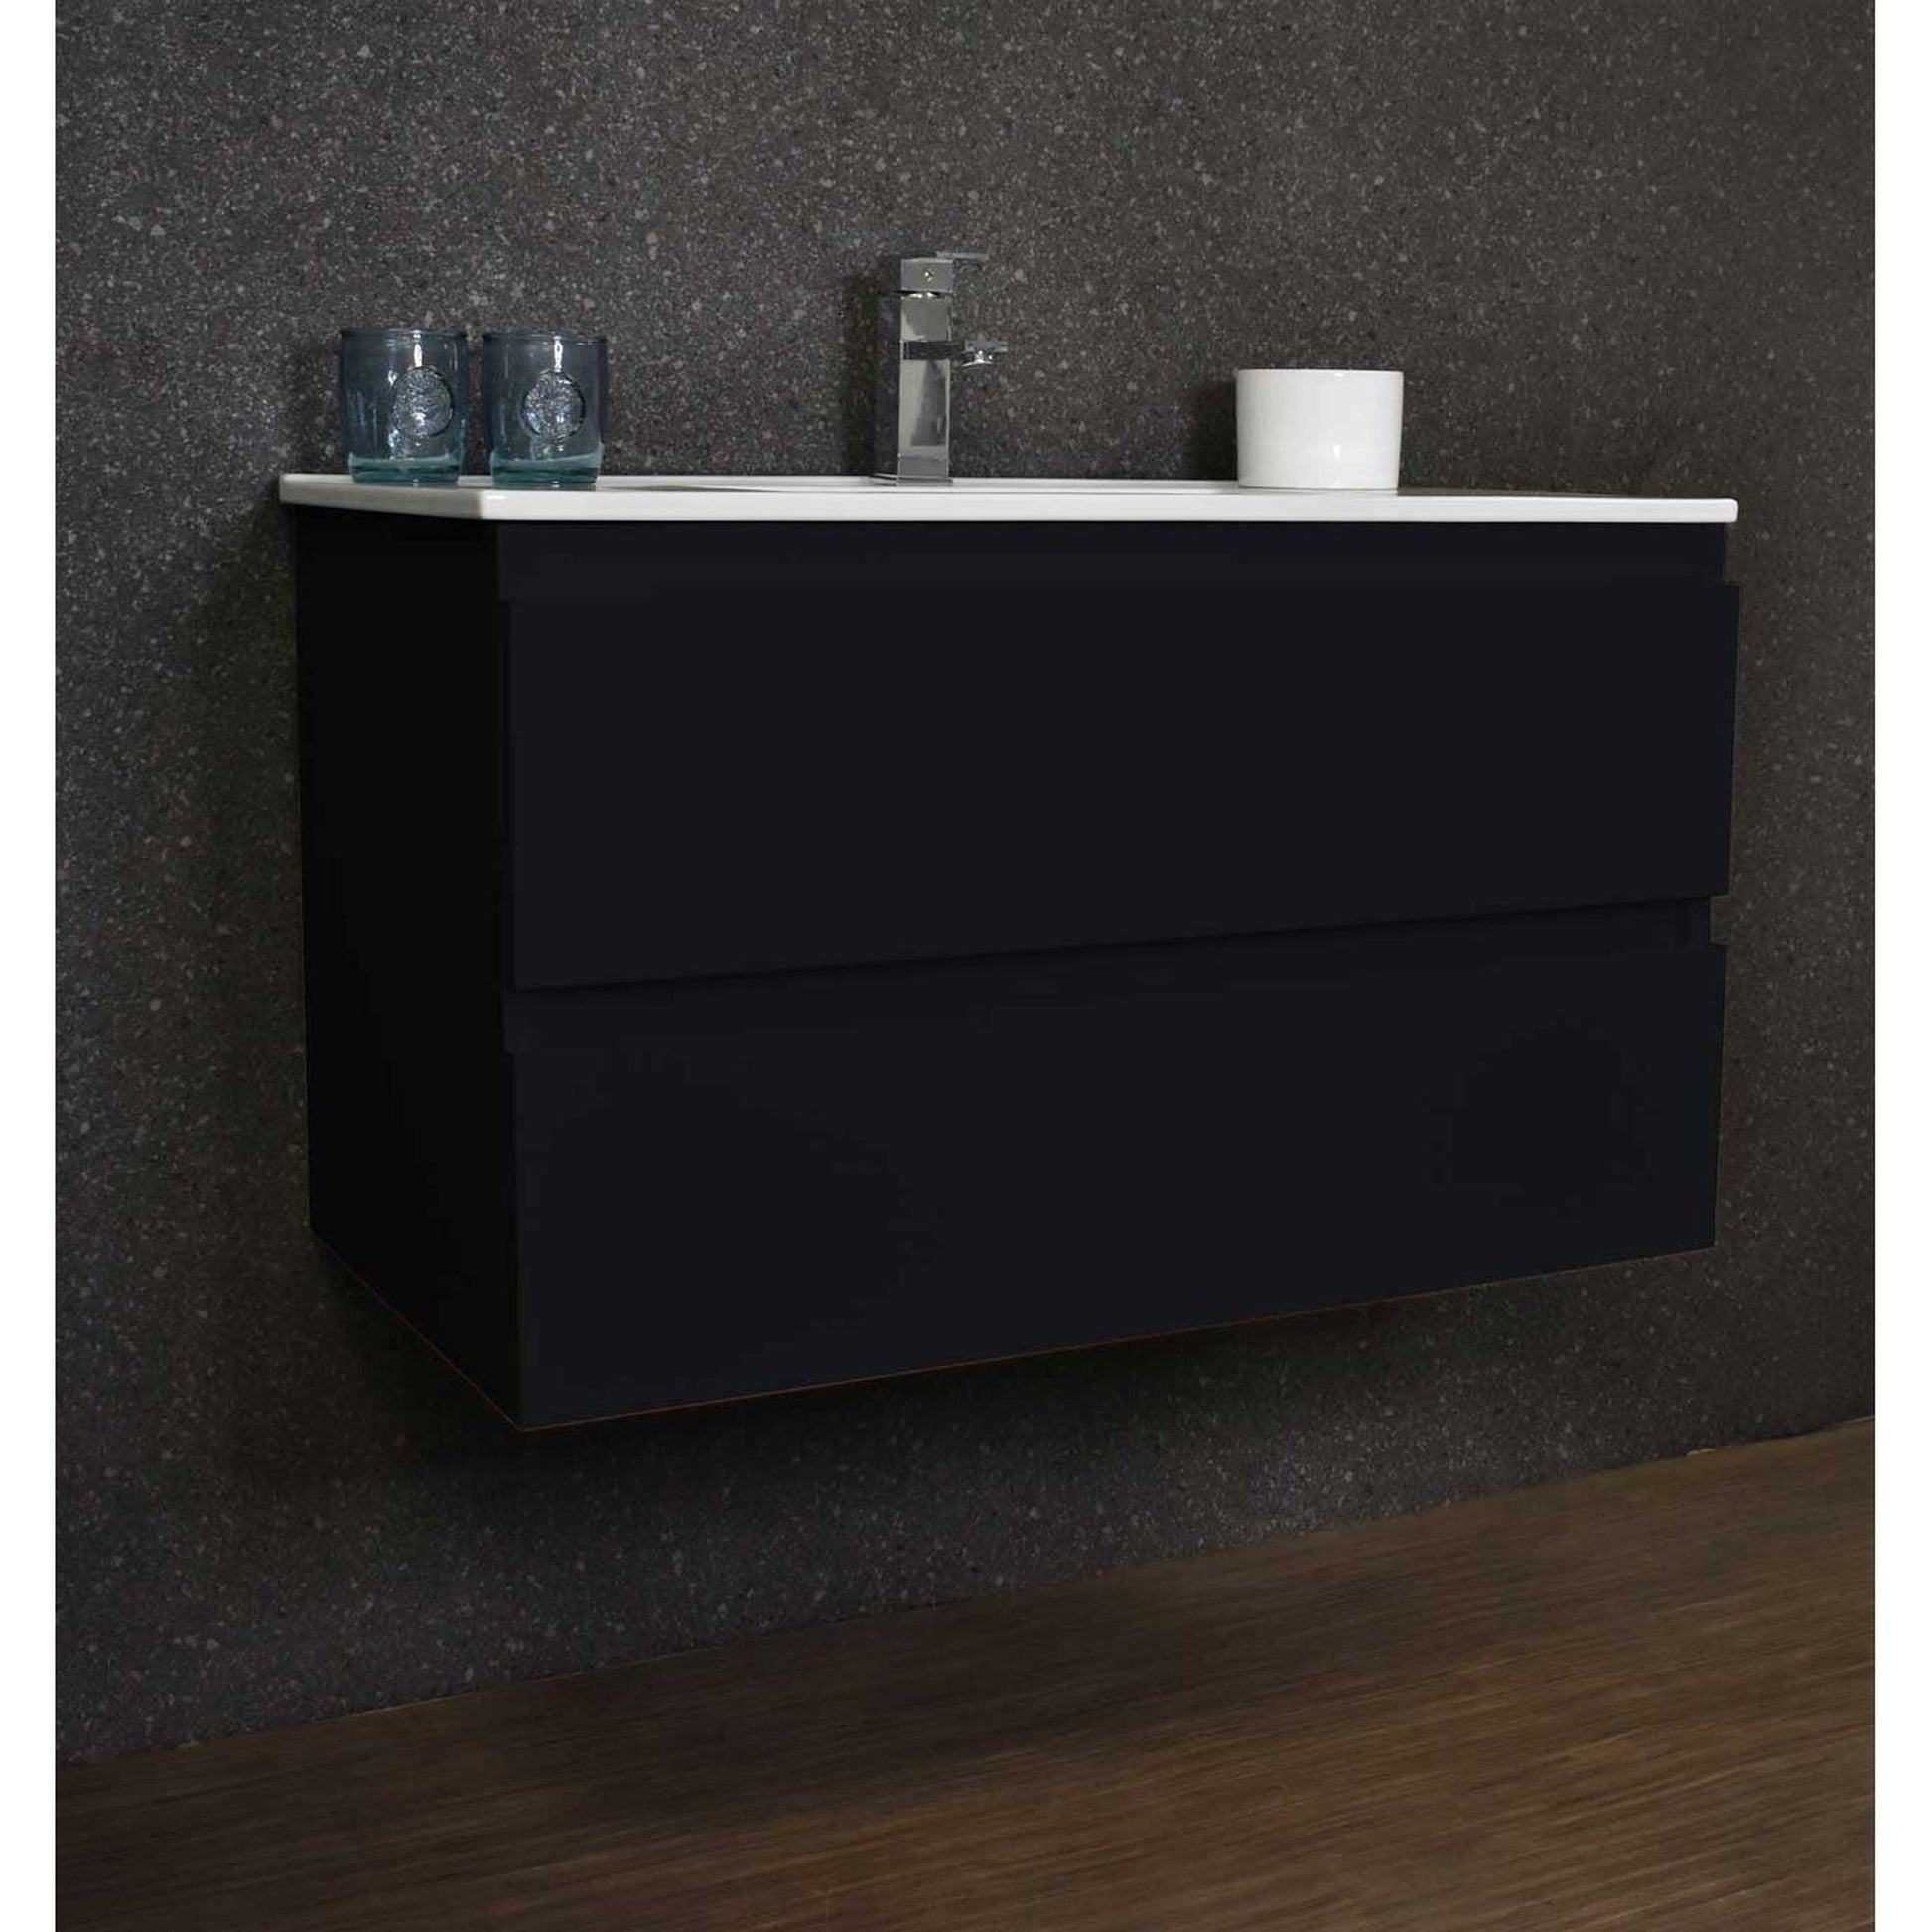 Volpa USA Salt 36" x 18" Glossy Black Wall-Mounted Floating Bathroom Vanity With Drawers, Integrated Porcelain Ceramic Top and Integrated Ceramic Sink